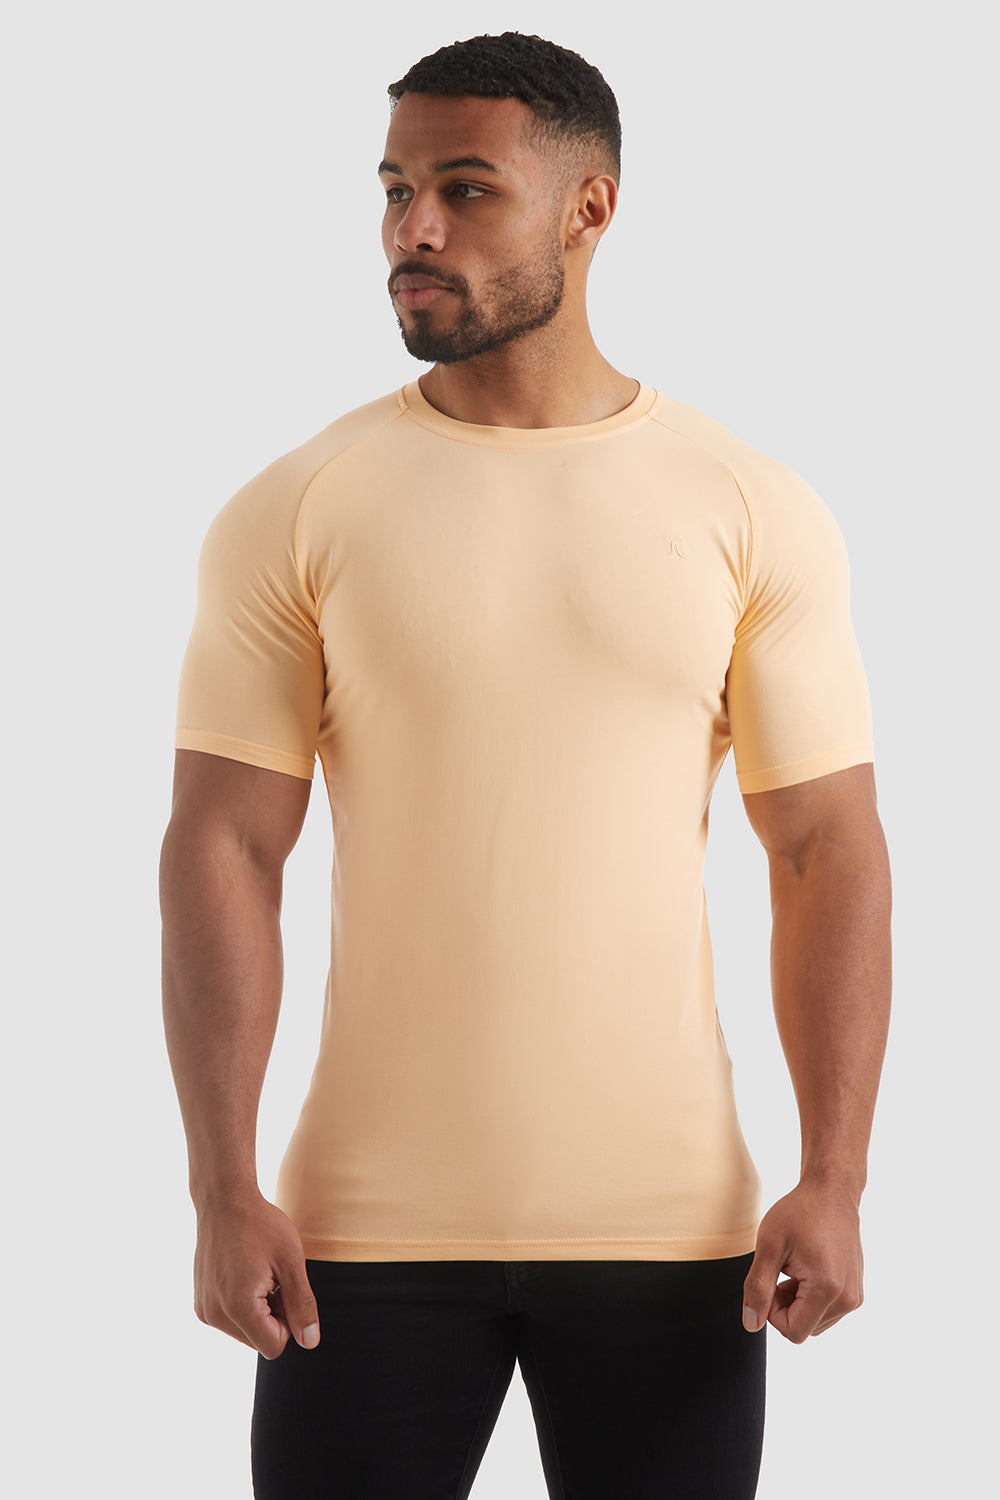 Muscle Fit T-Shirt in Papaya - TAILORED ATHLETE - ROW